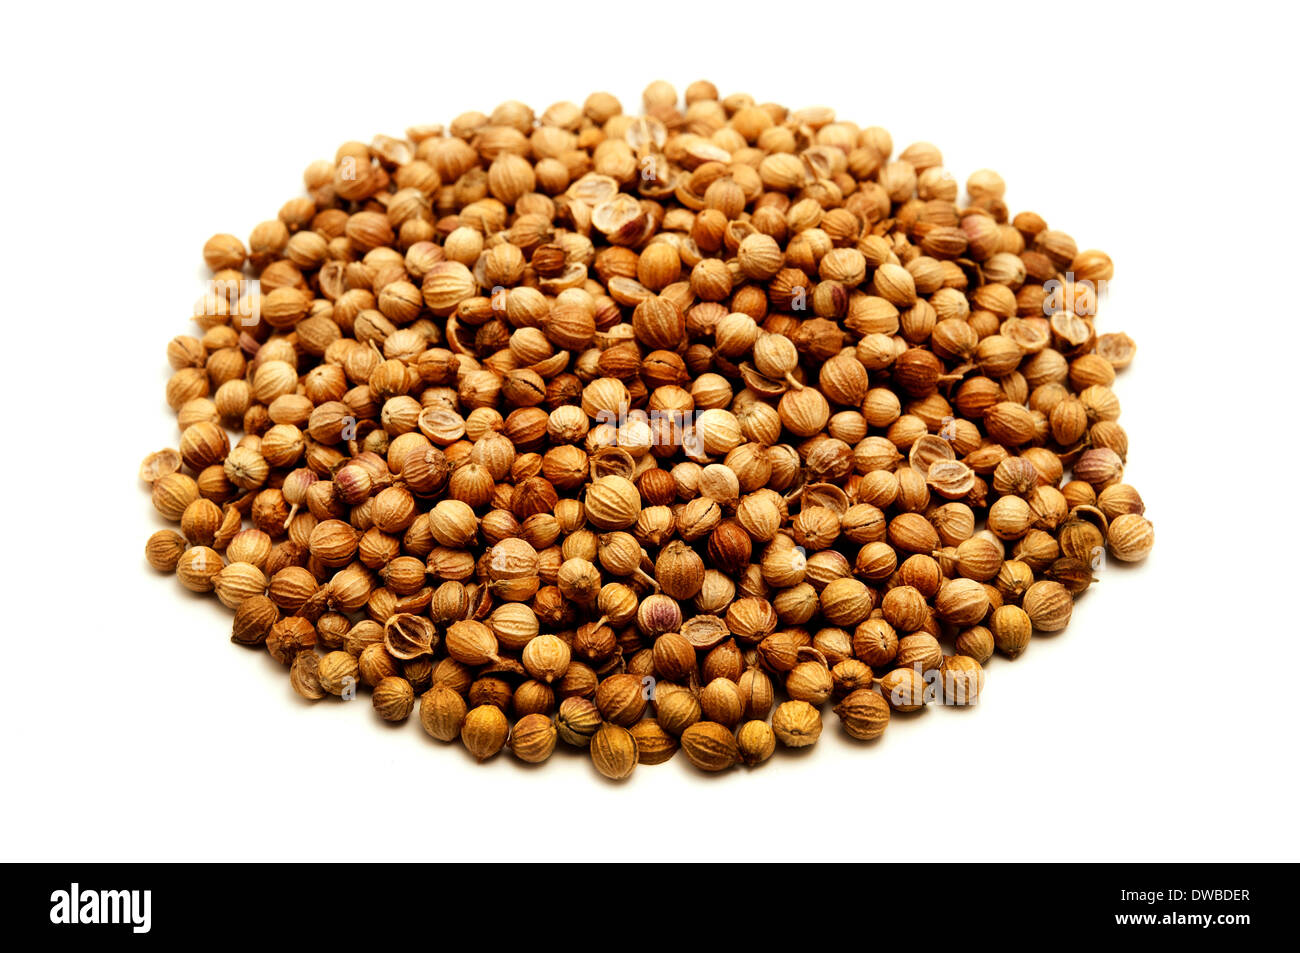 Coriander seeds on a white background Stock Photo